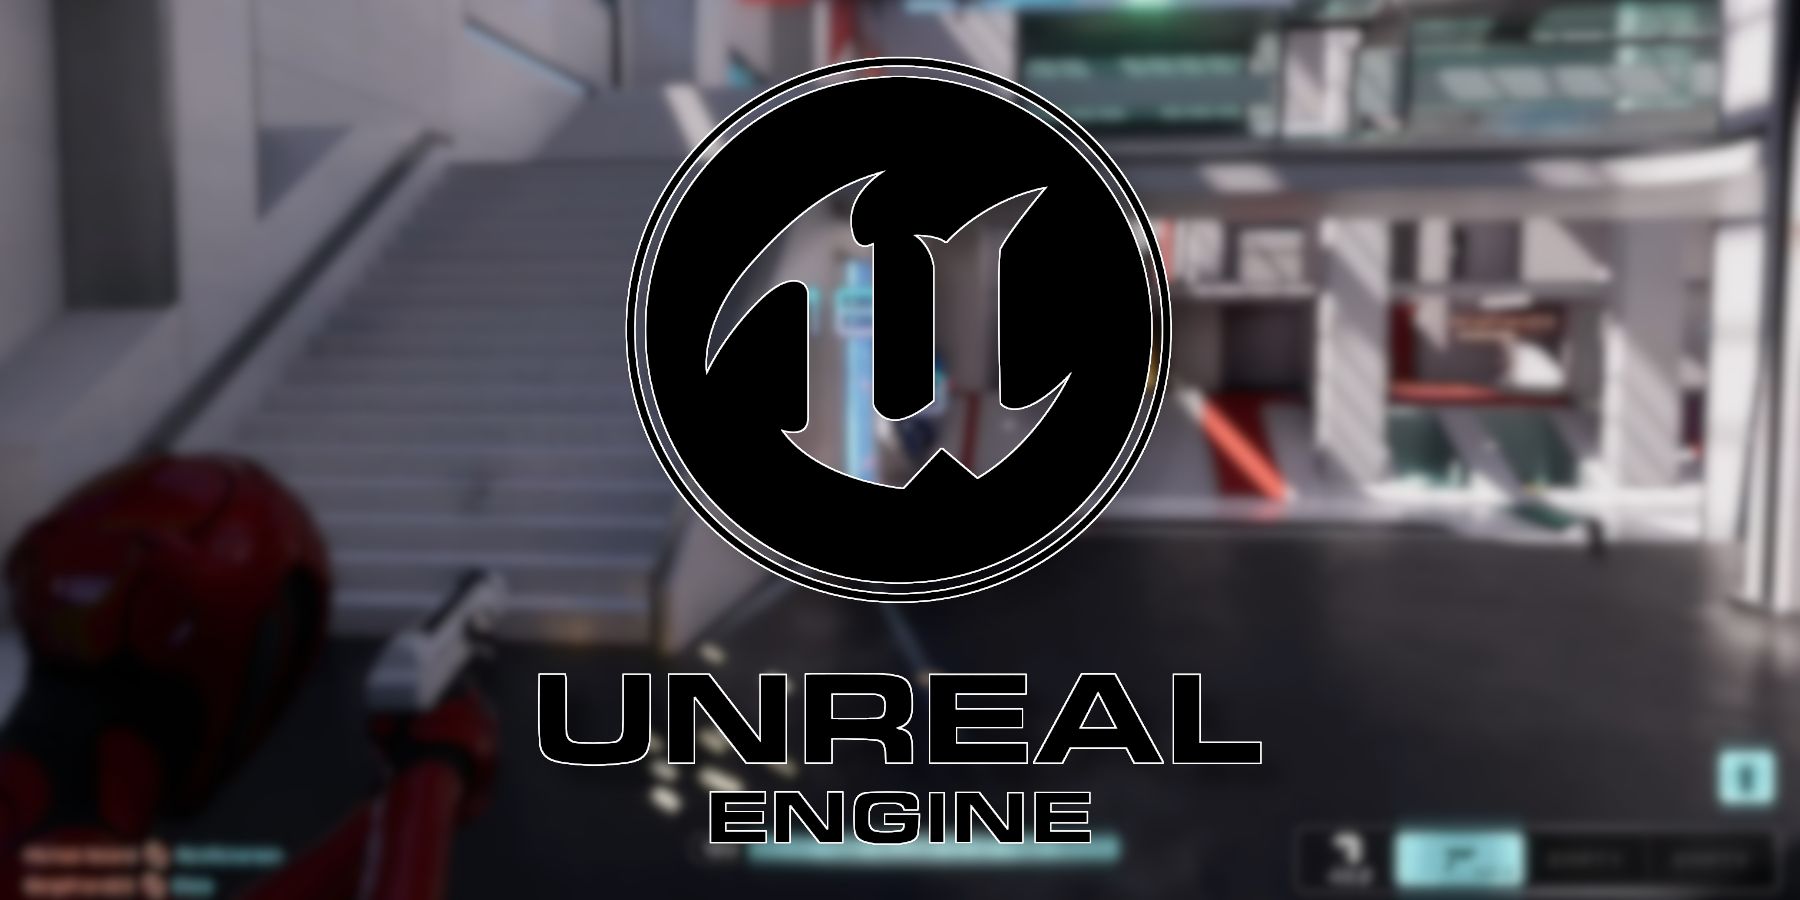 Screenshot from the multiplayer game Lyra with the Unreal Engine 5 logo in the middle.